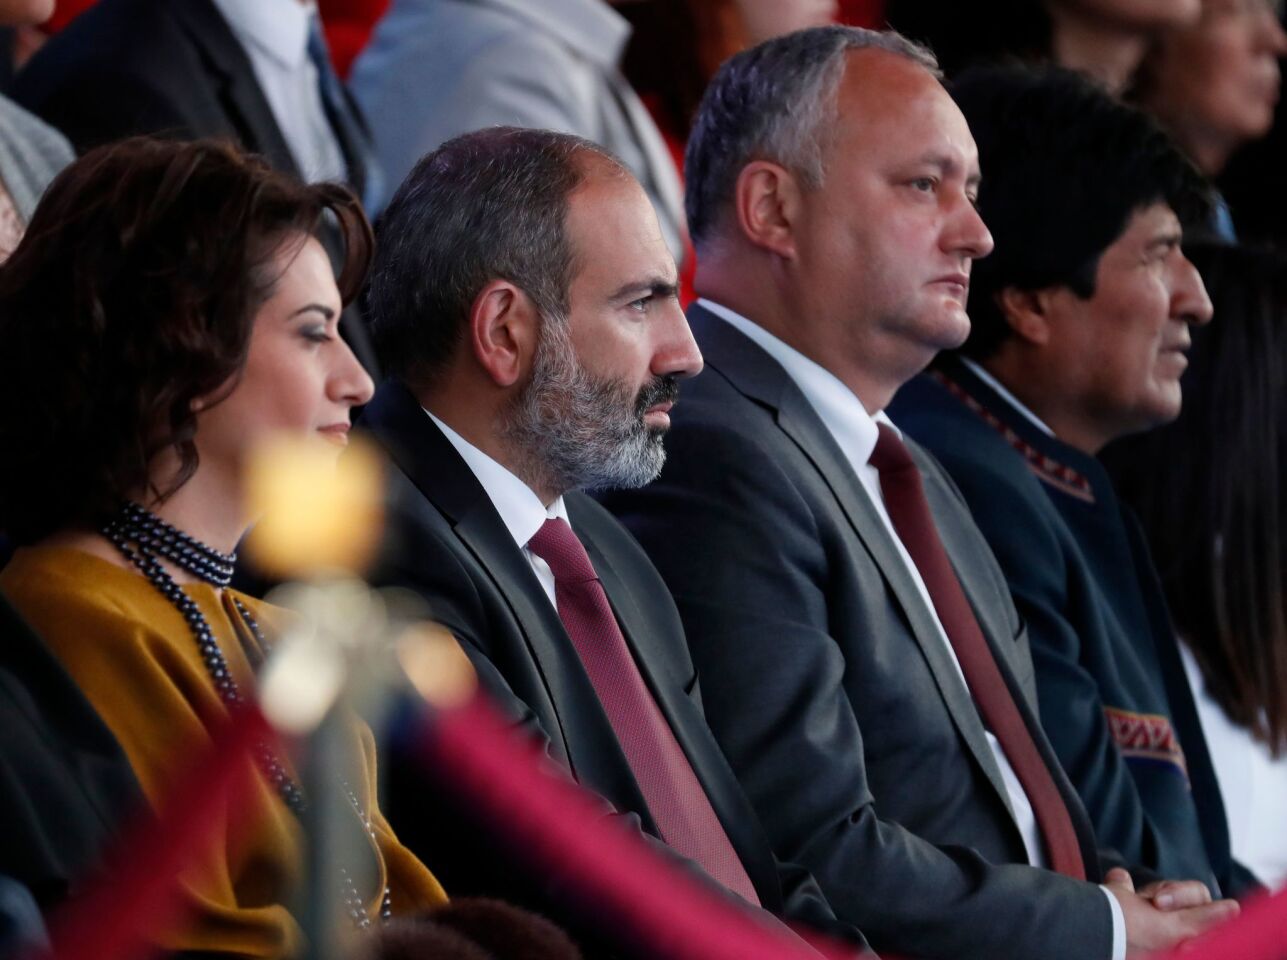 Armenian Prime Minister Nikol Pashinyan (2L), Moldovan President Igor Dodon (2R) and Bolivian President Evo Morales (R) attend a gala-concert dedicated to the Russia 2018 World Cup football tournament at Red Square in Moscow on June 13, 2018. / AFP PHOTO / POOL / SERGEI CHIRIKOVSERGEI CHIRIKOV/AFP/Getty Images ** OUTS - ELSENT, FPG, CM - OUTS * NM, PH, VA if sourced by CT, LA or MoD **